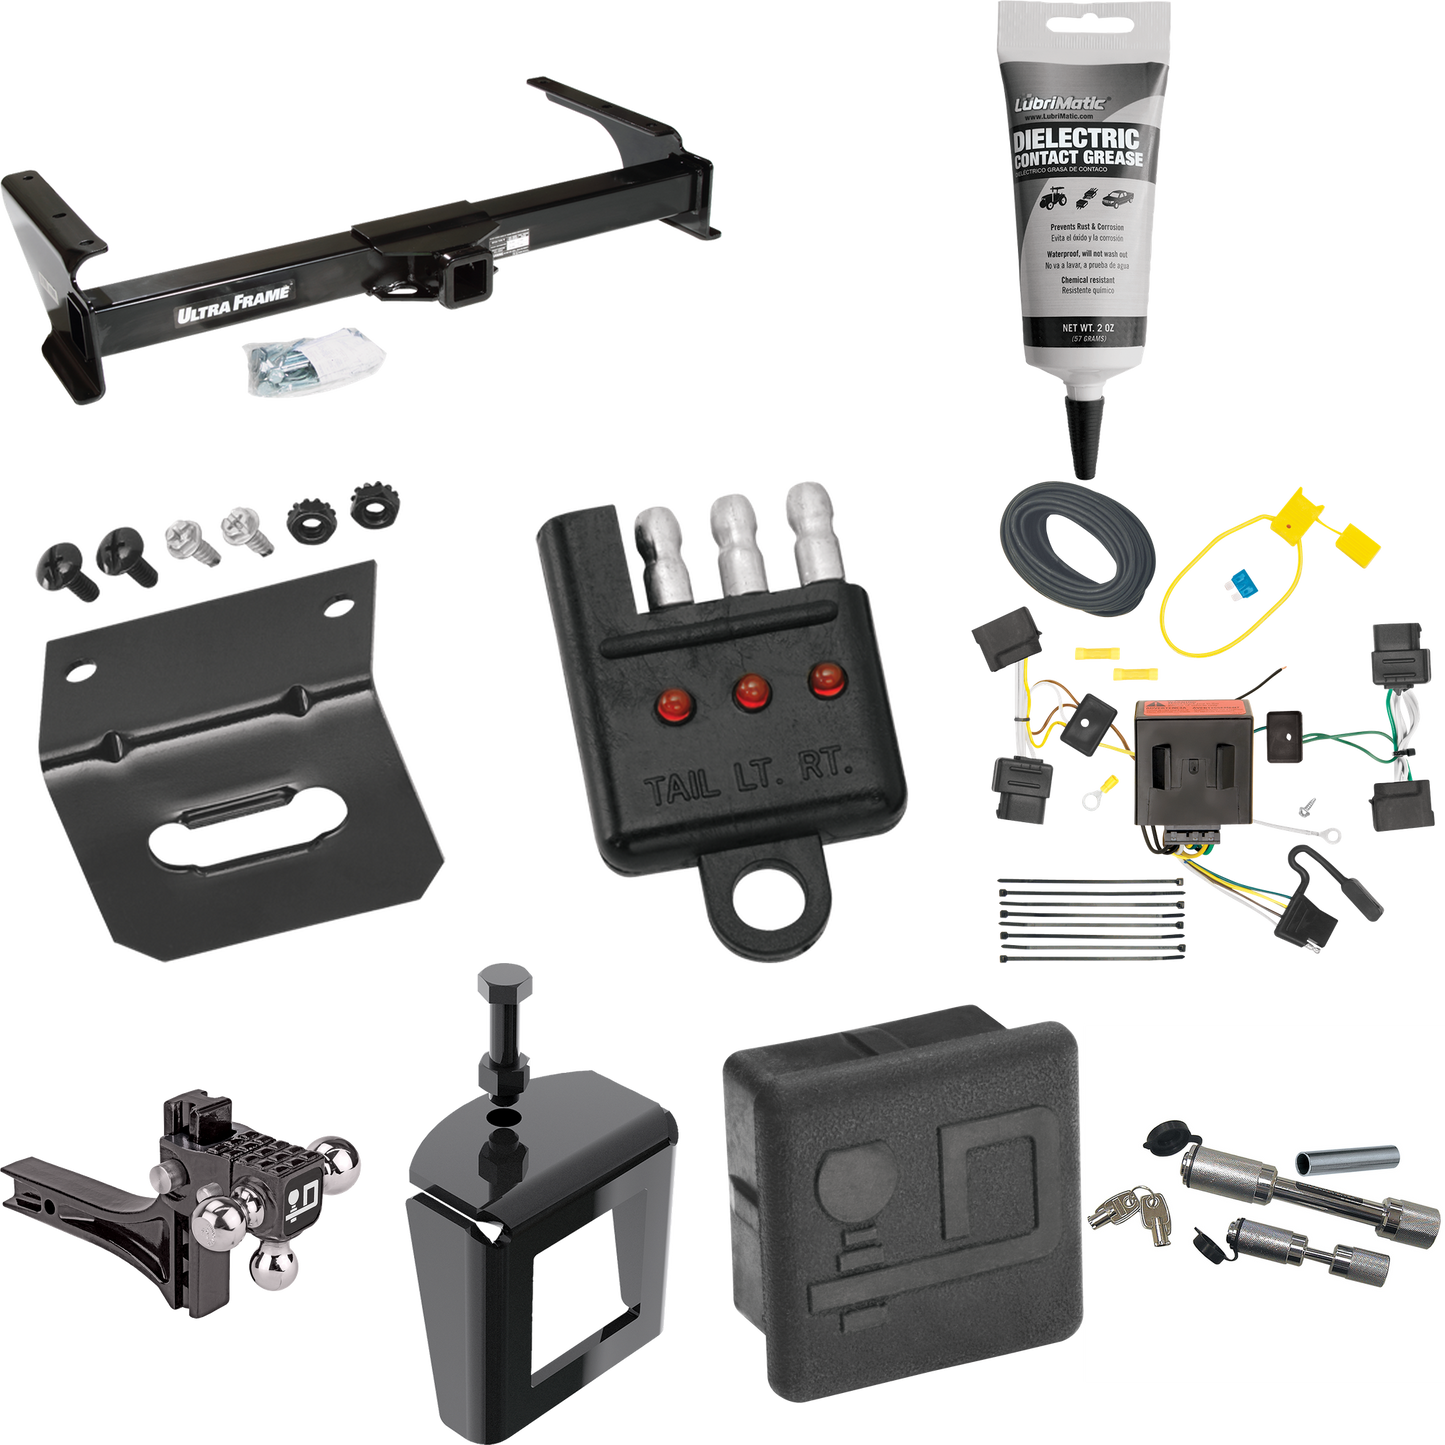 Fits 2009-2012 Ford E-350 Econoline Super Duty Trailer Hitch Tow PKG w/ 4-Flat Wiring Harness + Adjustable Drop Rise Triple Ball Ball Mount 1-7/8" & 2" & 2-5/16" Trailer Balls + Dual Hitch & Coupler Locks + Hitch Cover + Wiring Bracket + Wiring Teste